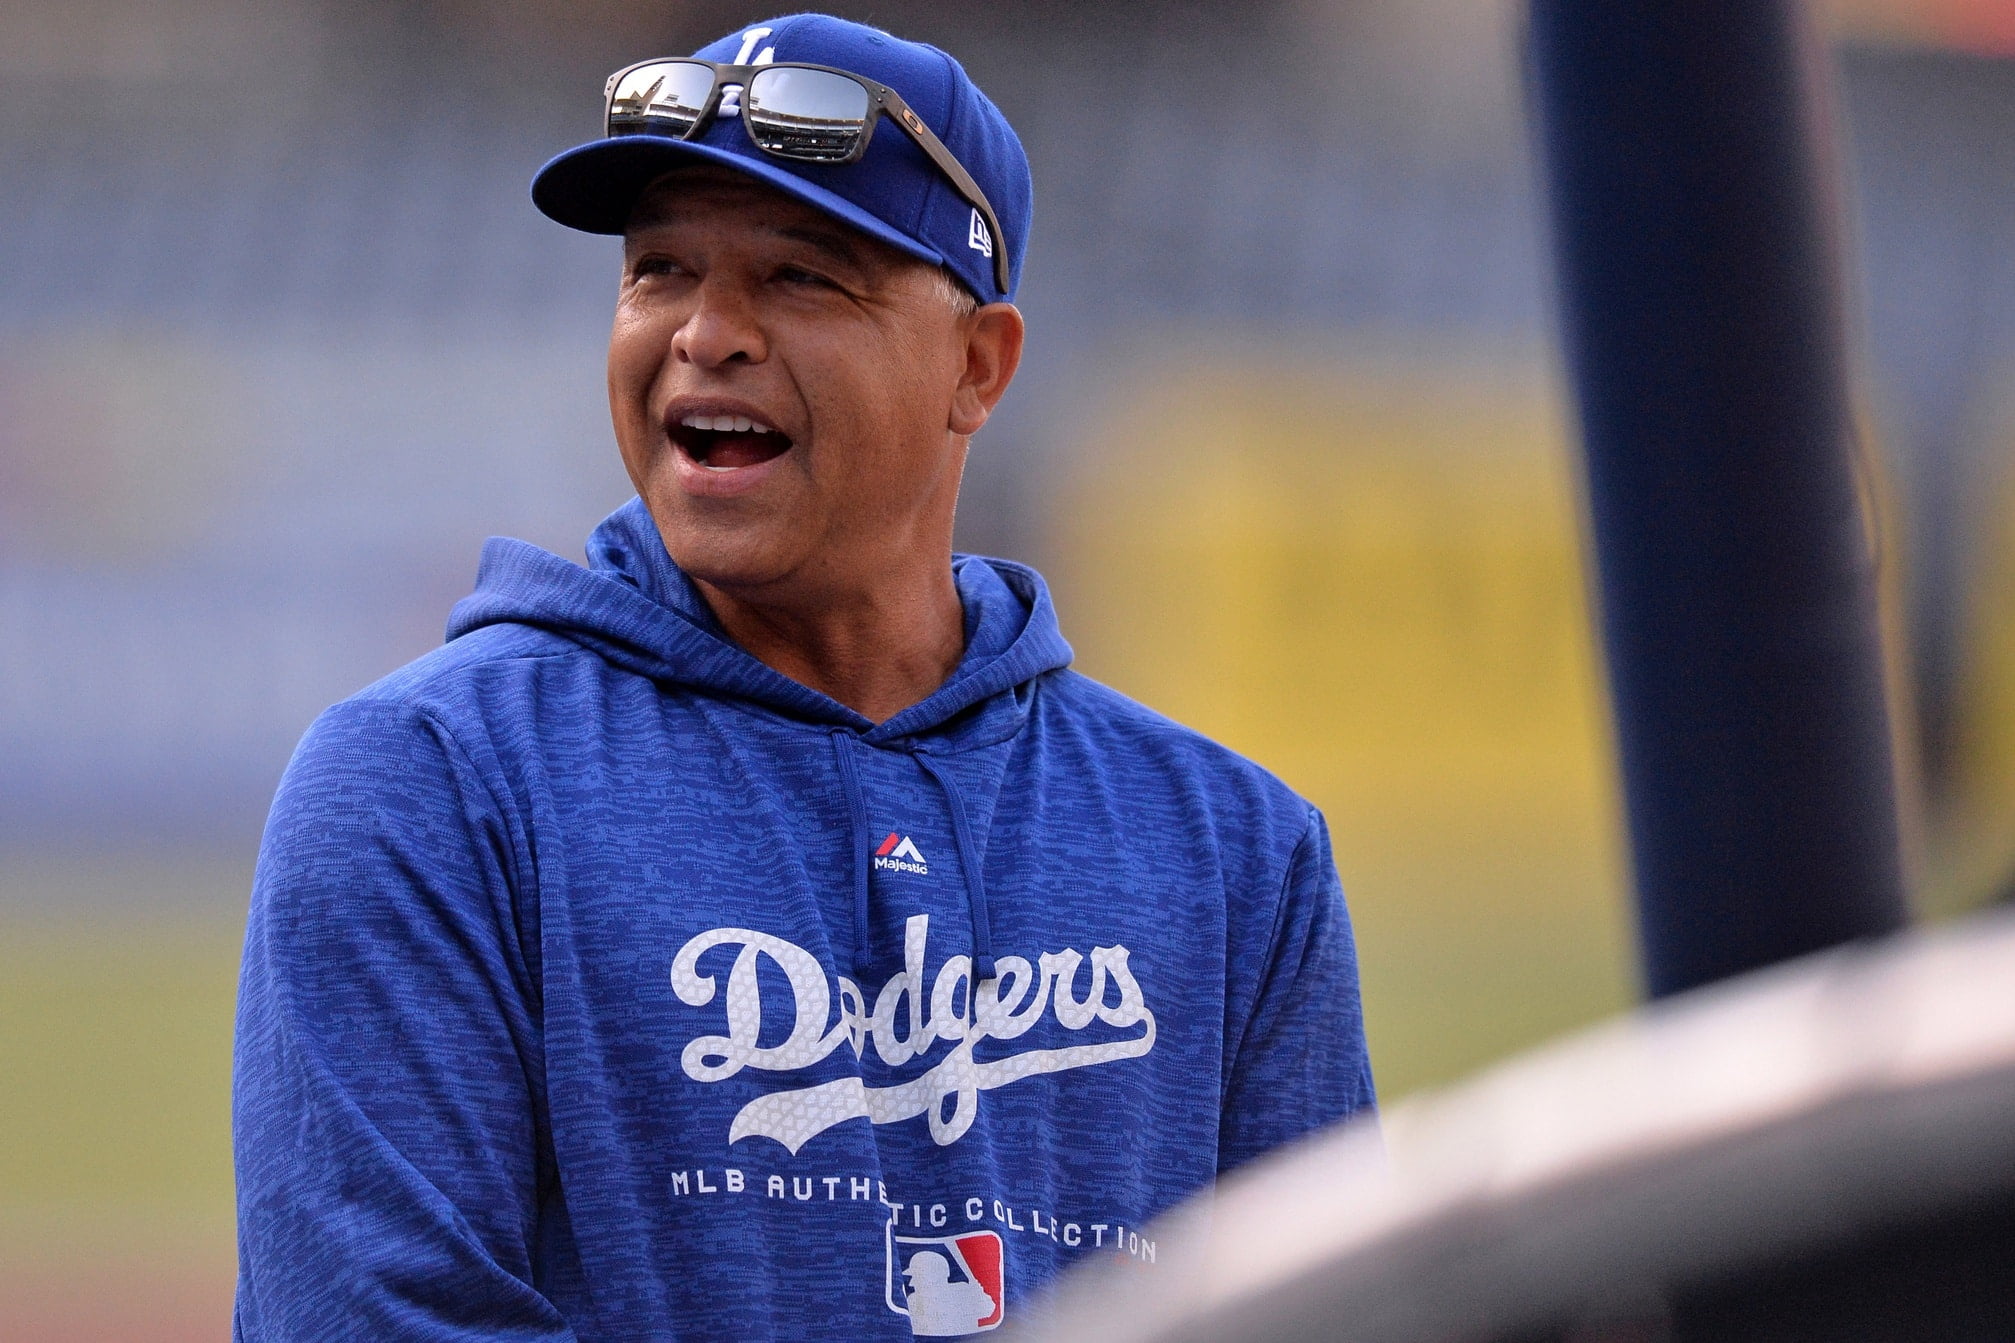 Dodgers manager Dave Roberts